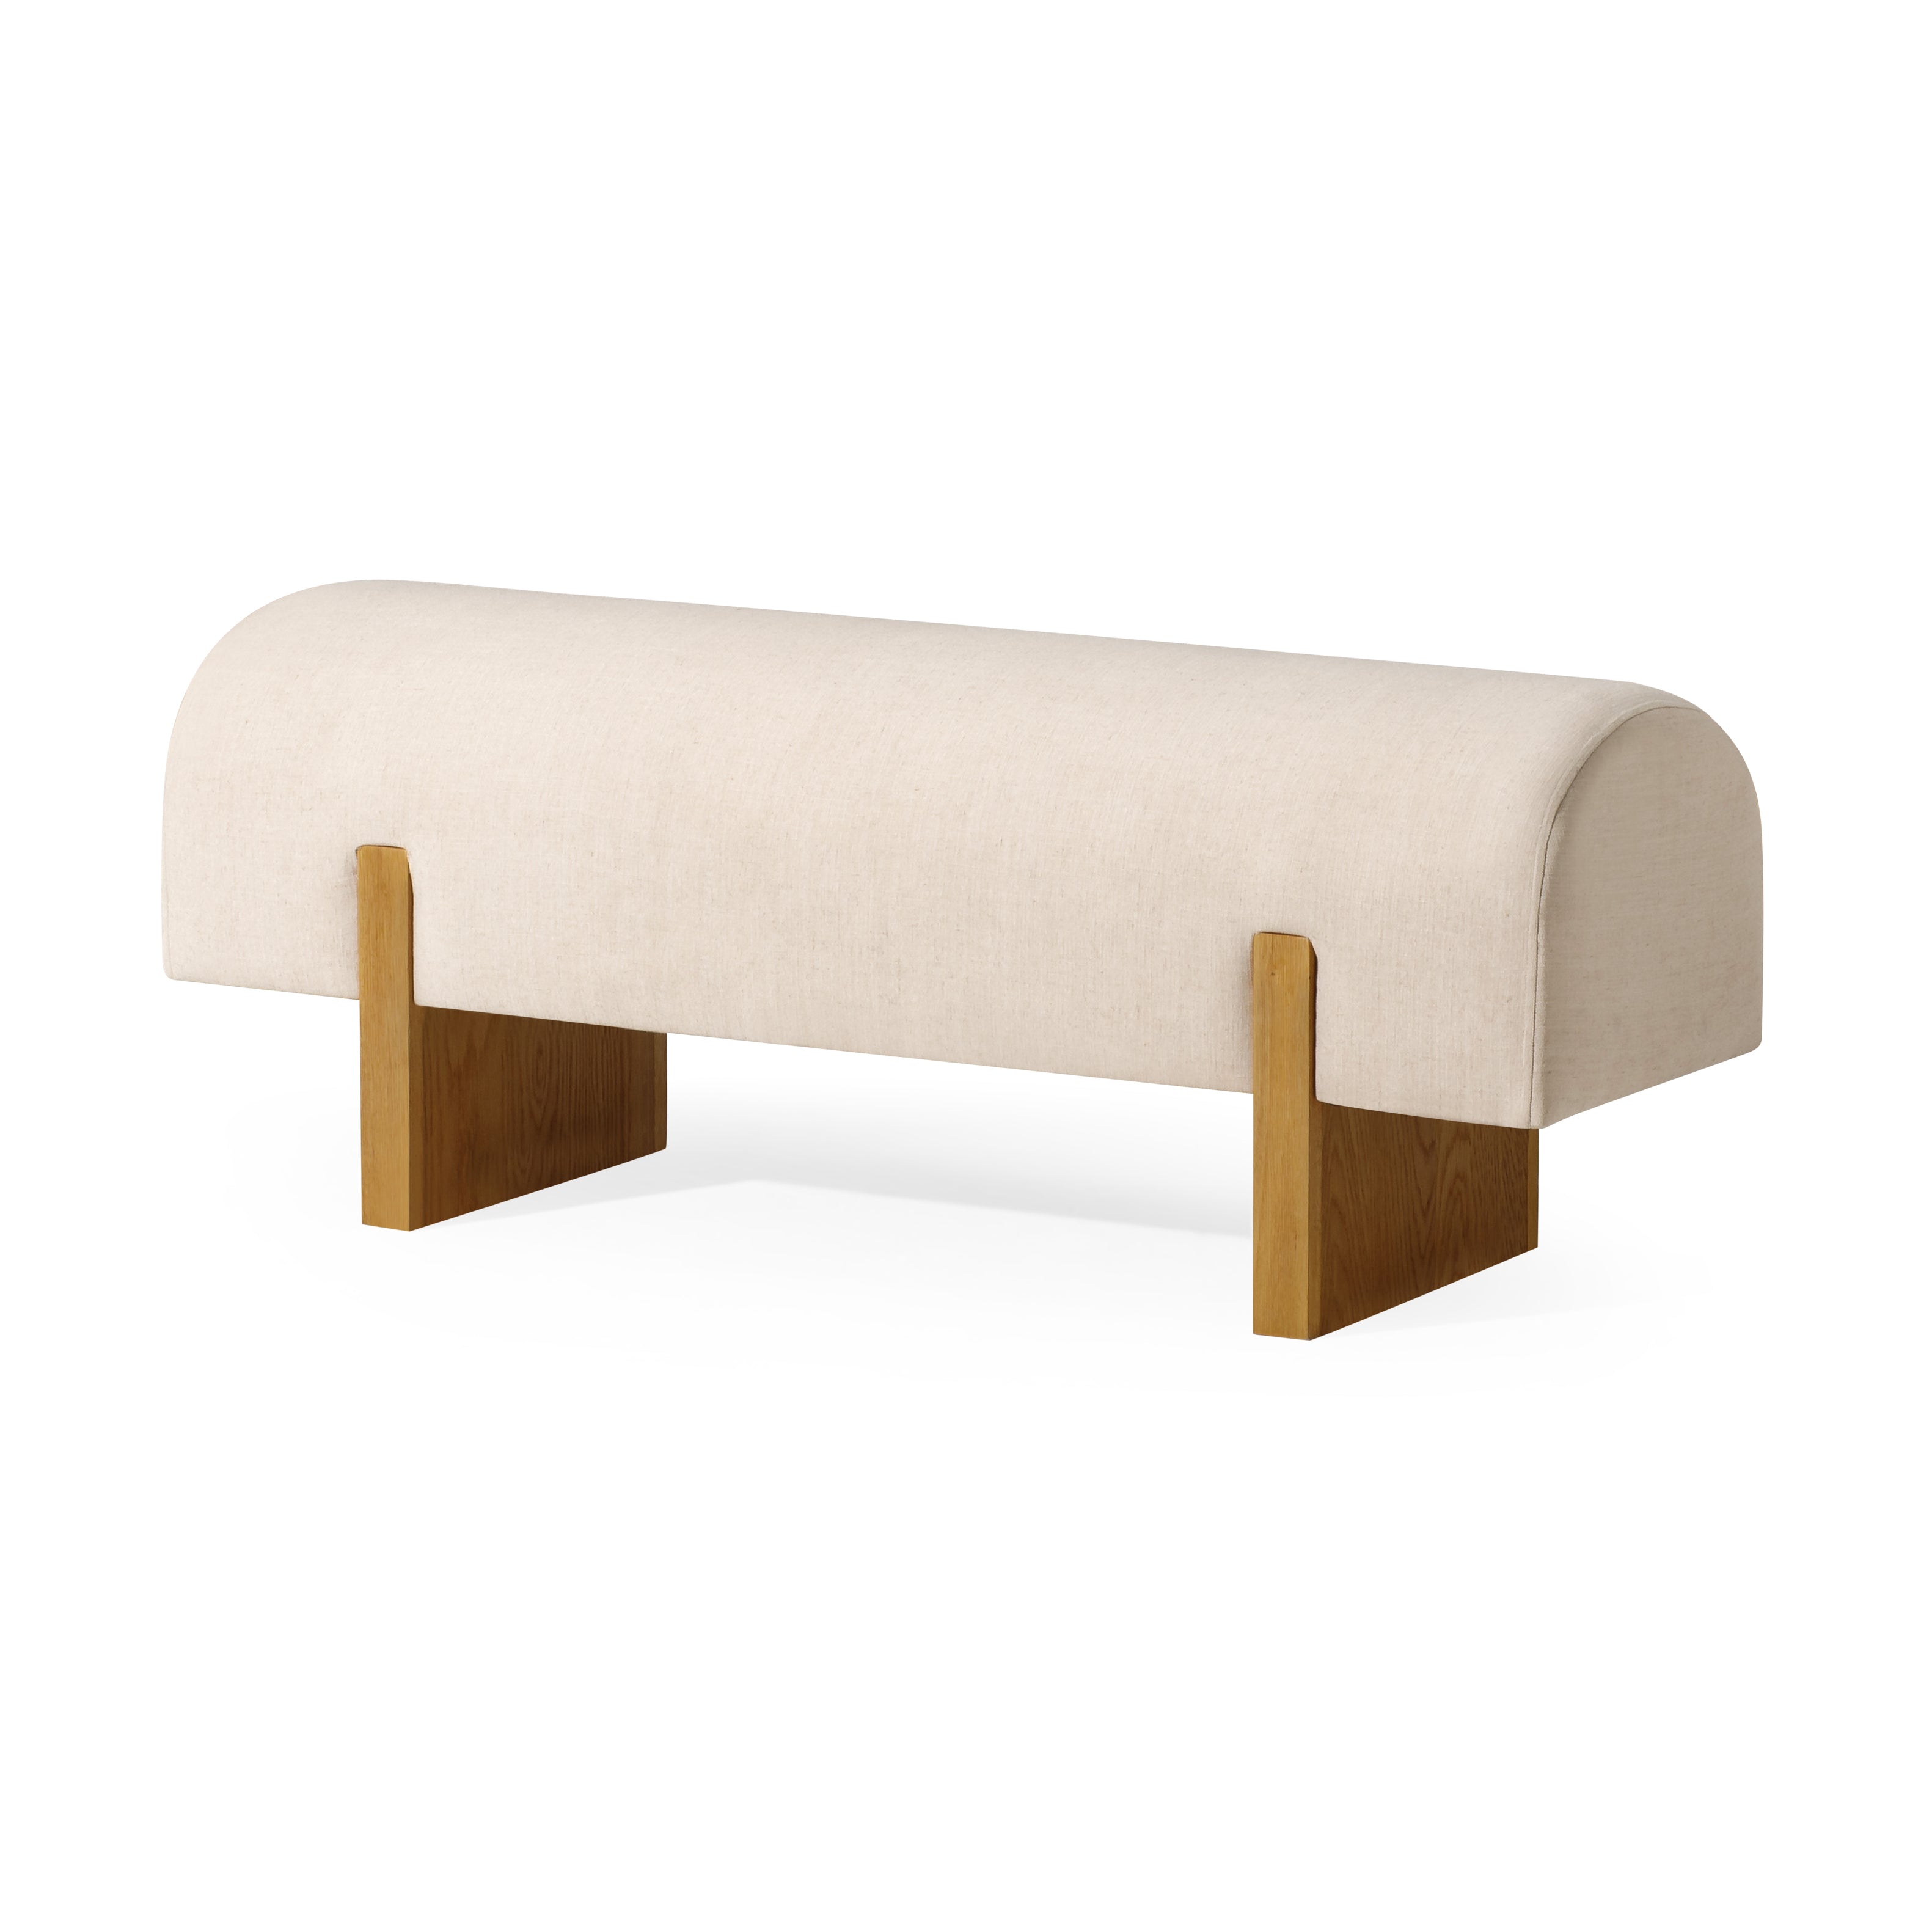 Juno Modern Upholstered Wooden Bench in Refined Natural Finish